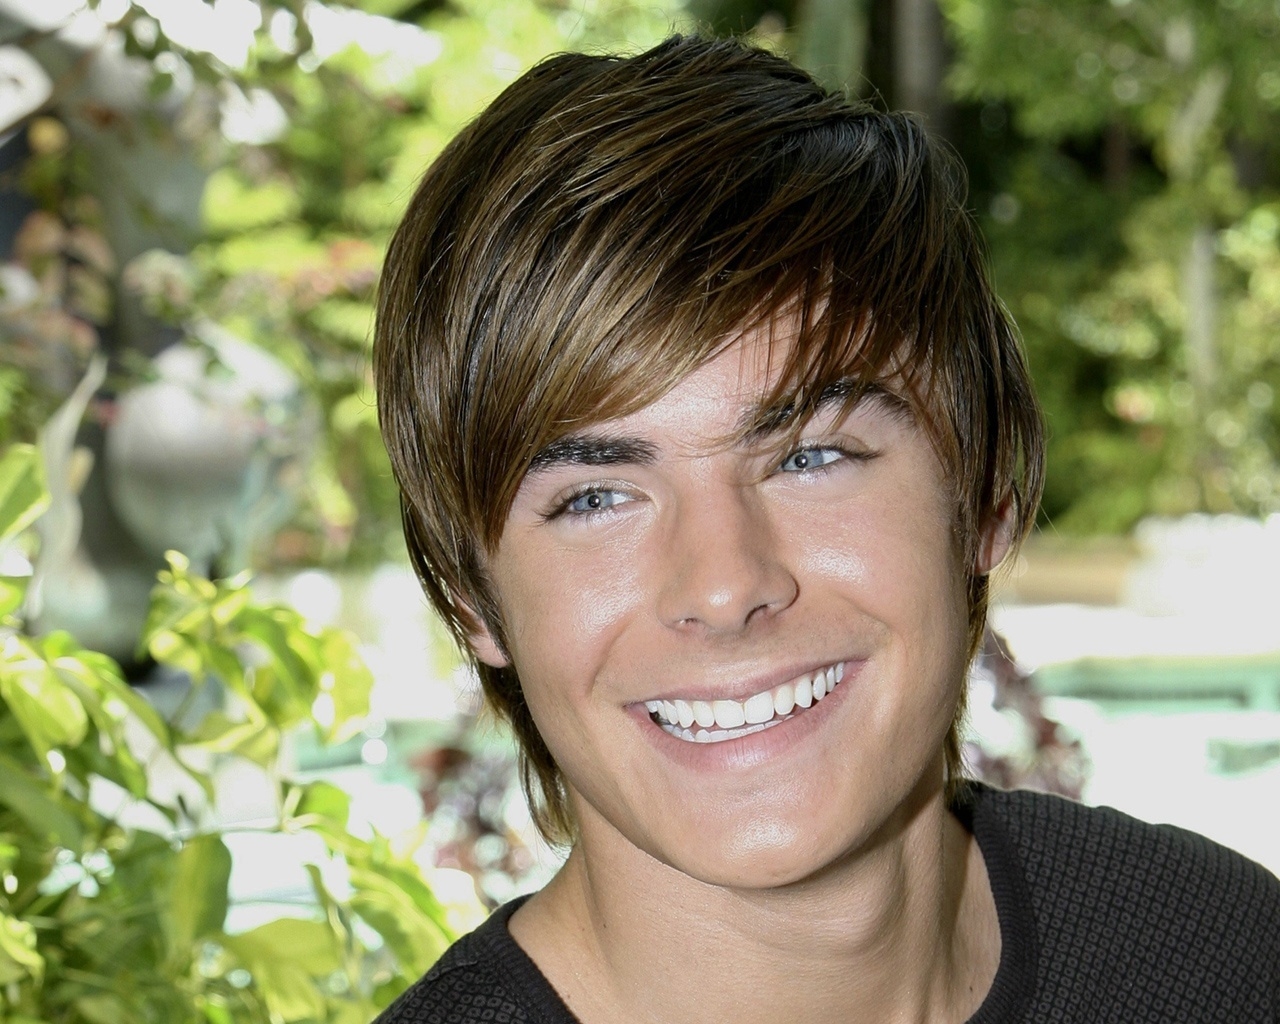 Zac Efron Smile for 1280 x 1024 resolution